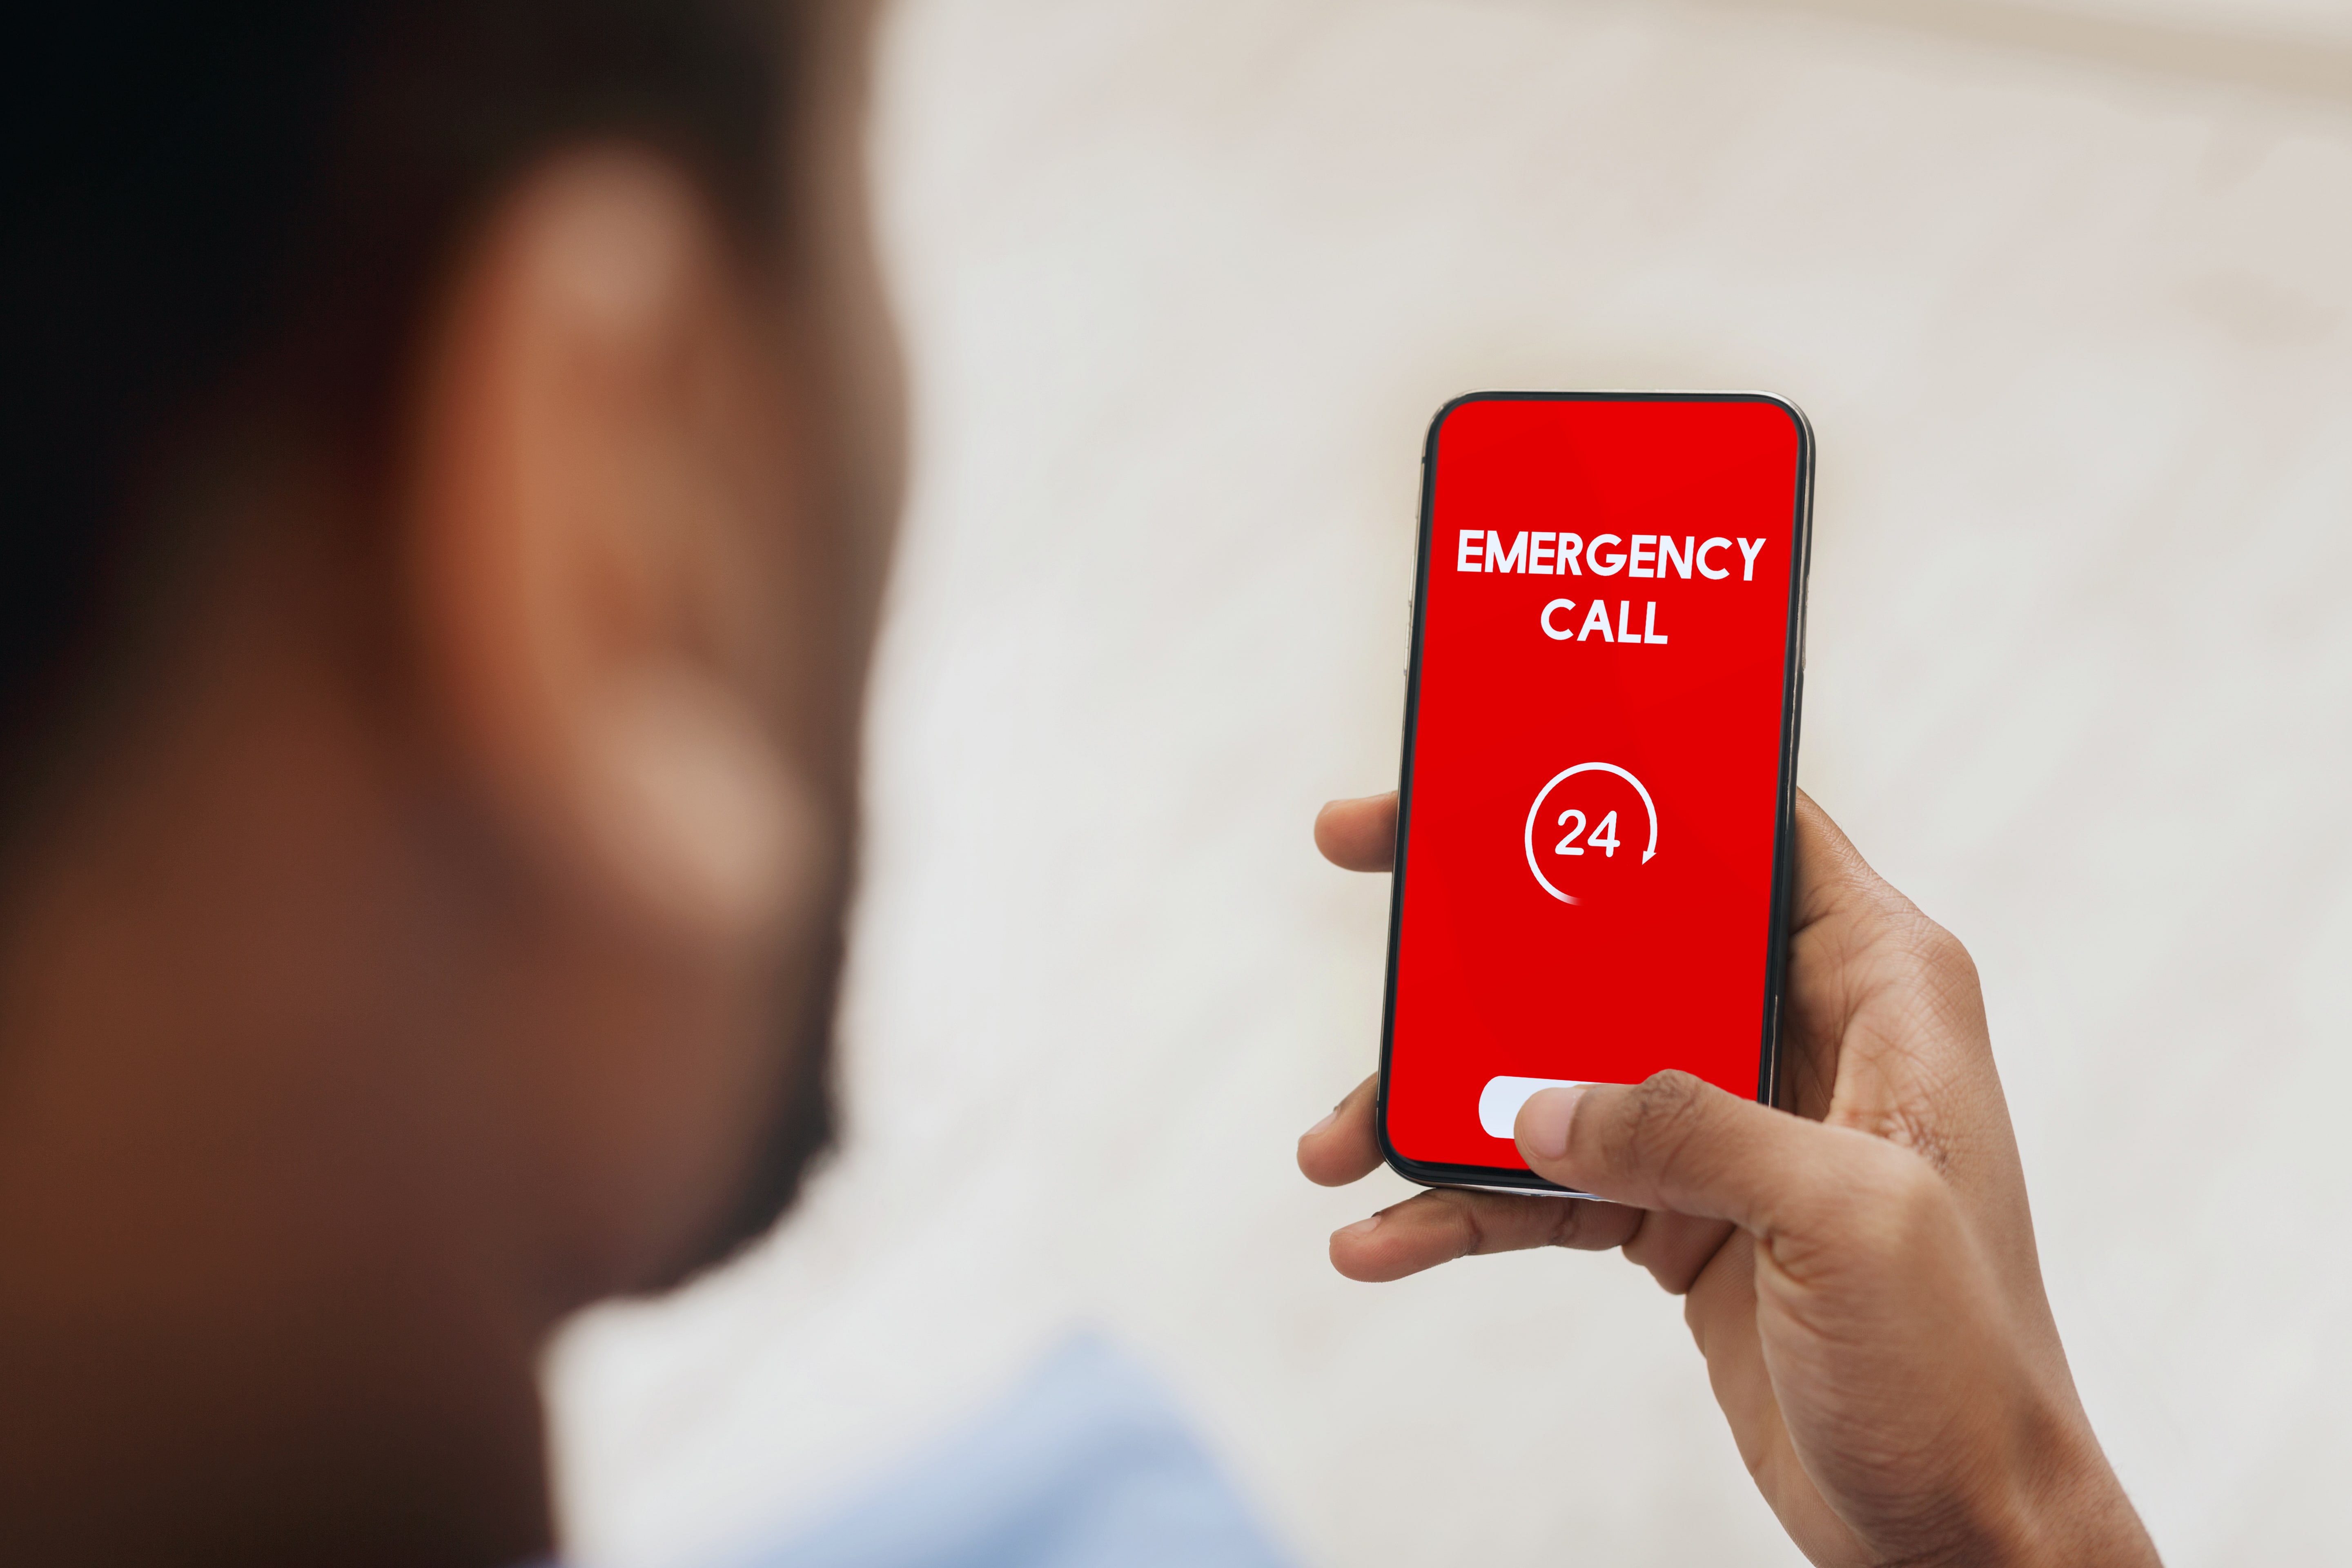 Making a False Emergency Call Laws, Penalties & Defences in Australia